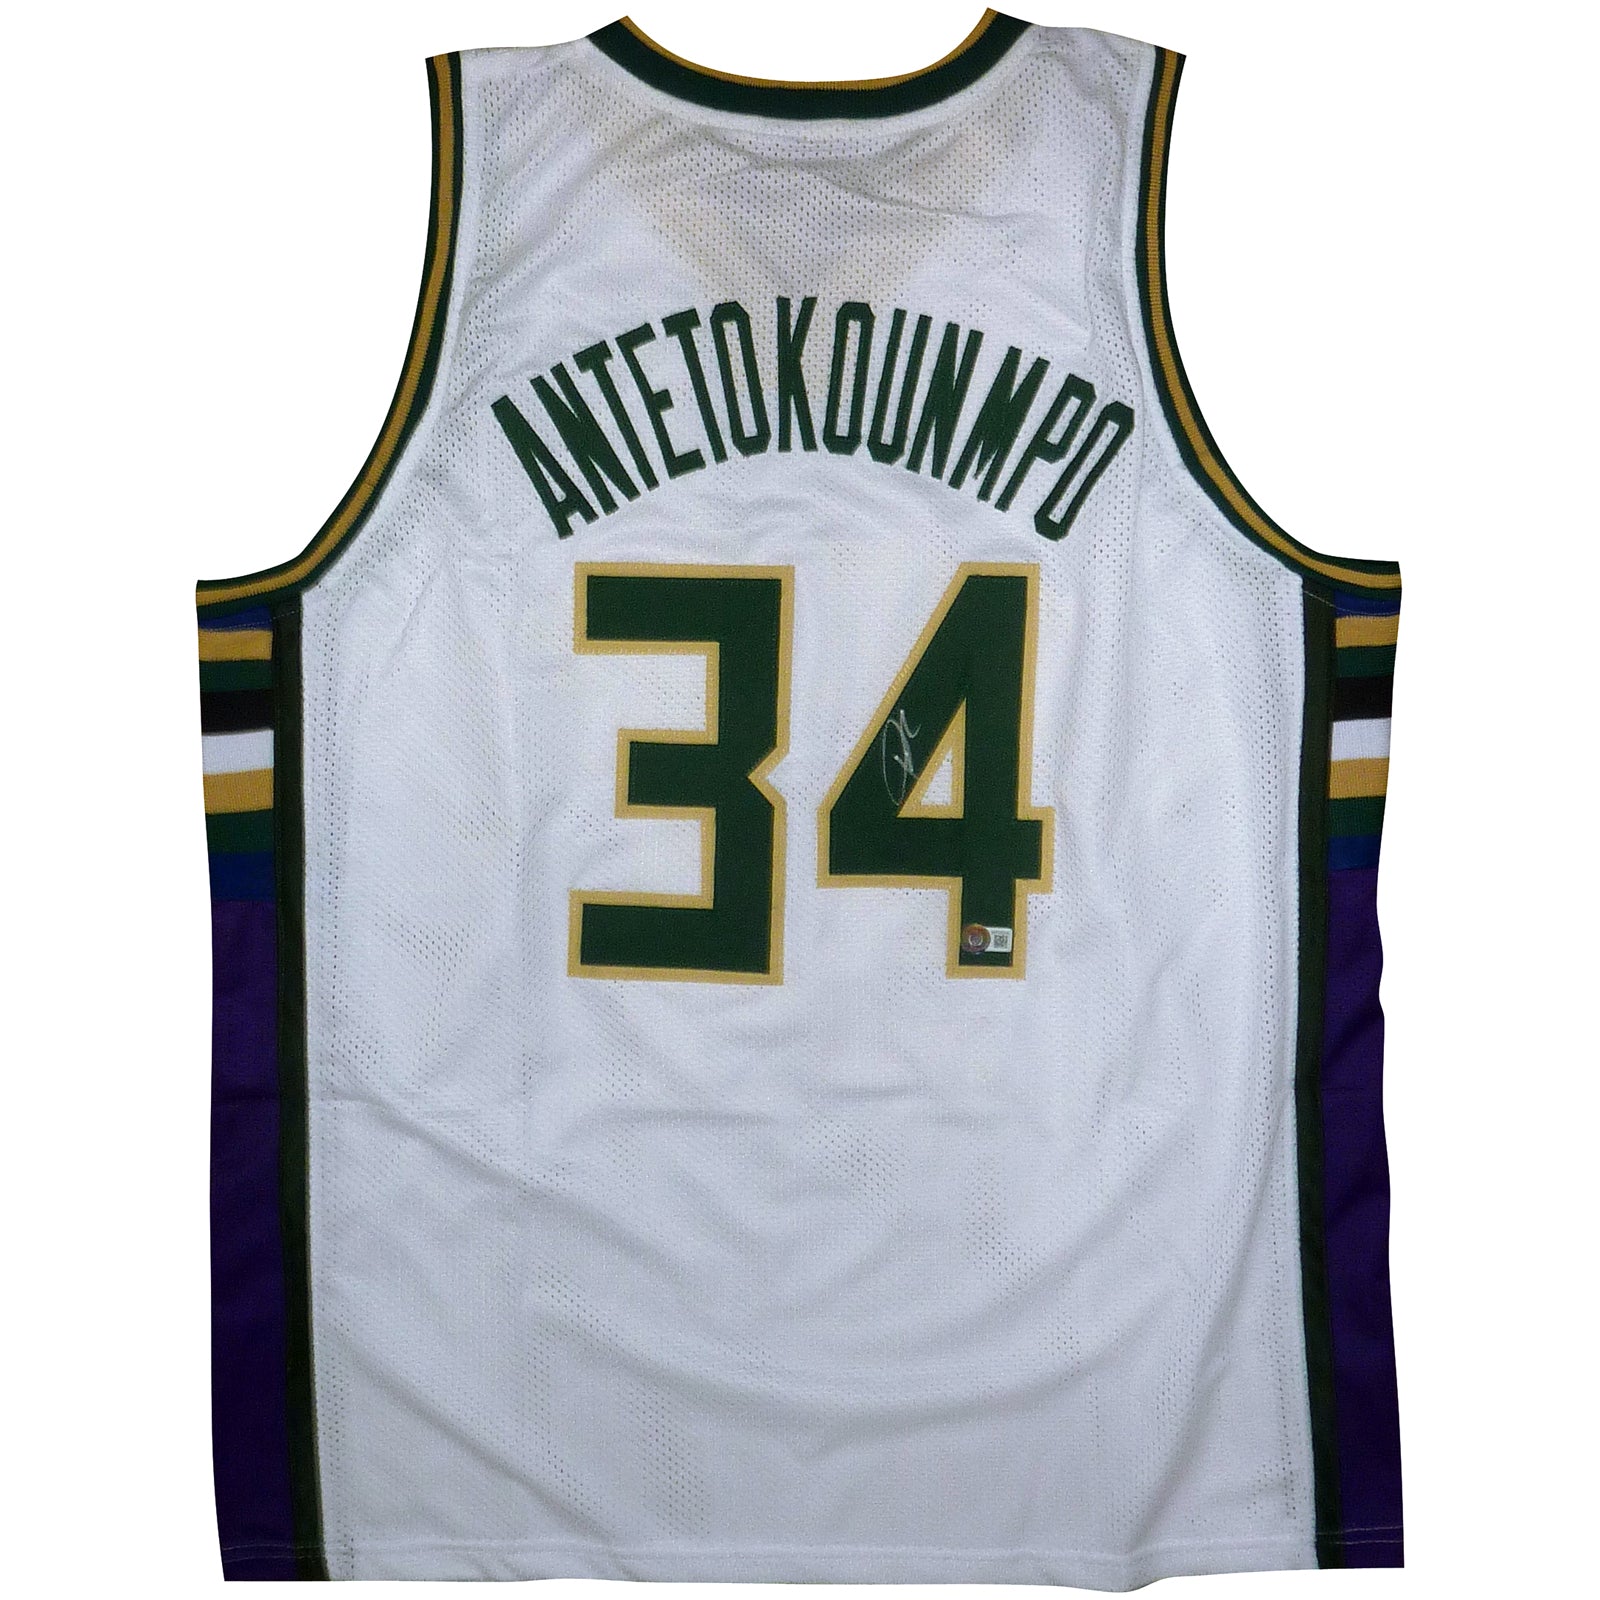 Lakers Jerseys for sale in East Saint Louis, Illinois